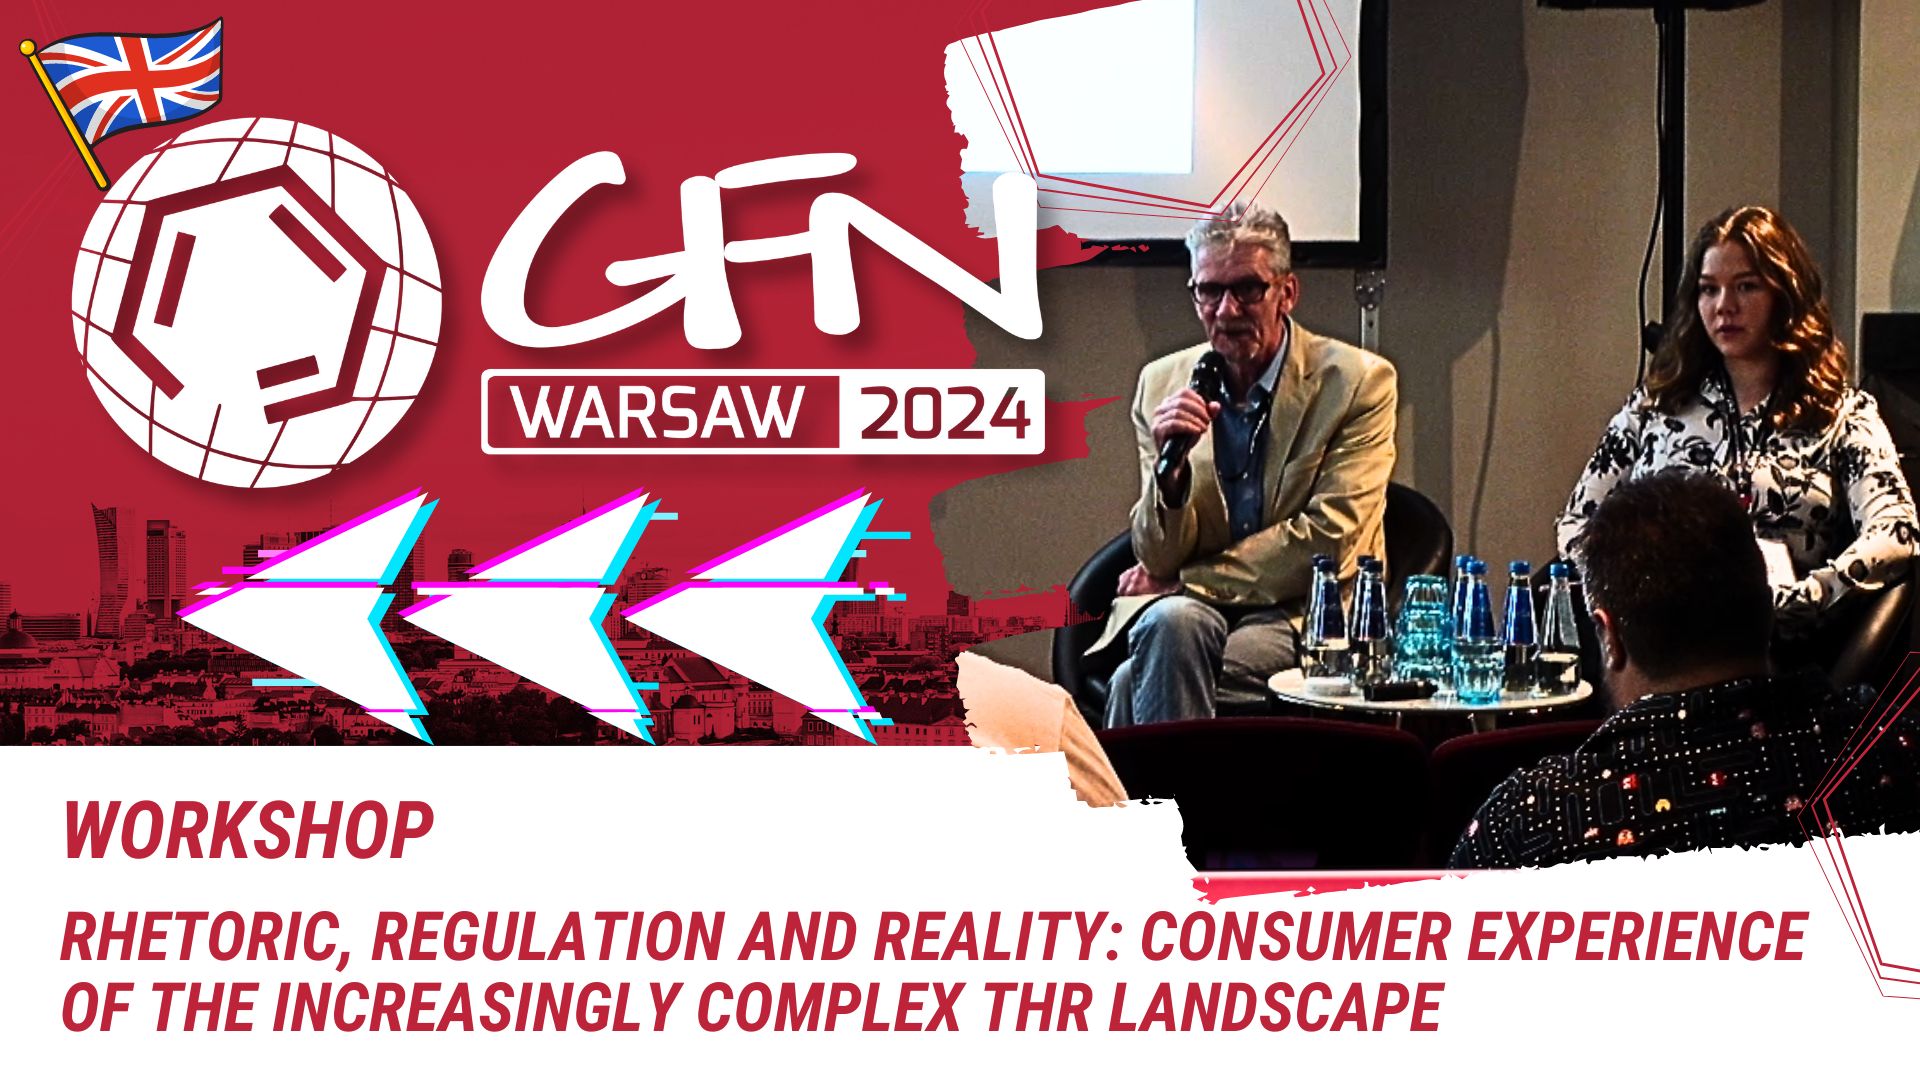 Consumer experience of the increasingly complex THR landscape - Workshop | #GFN24